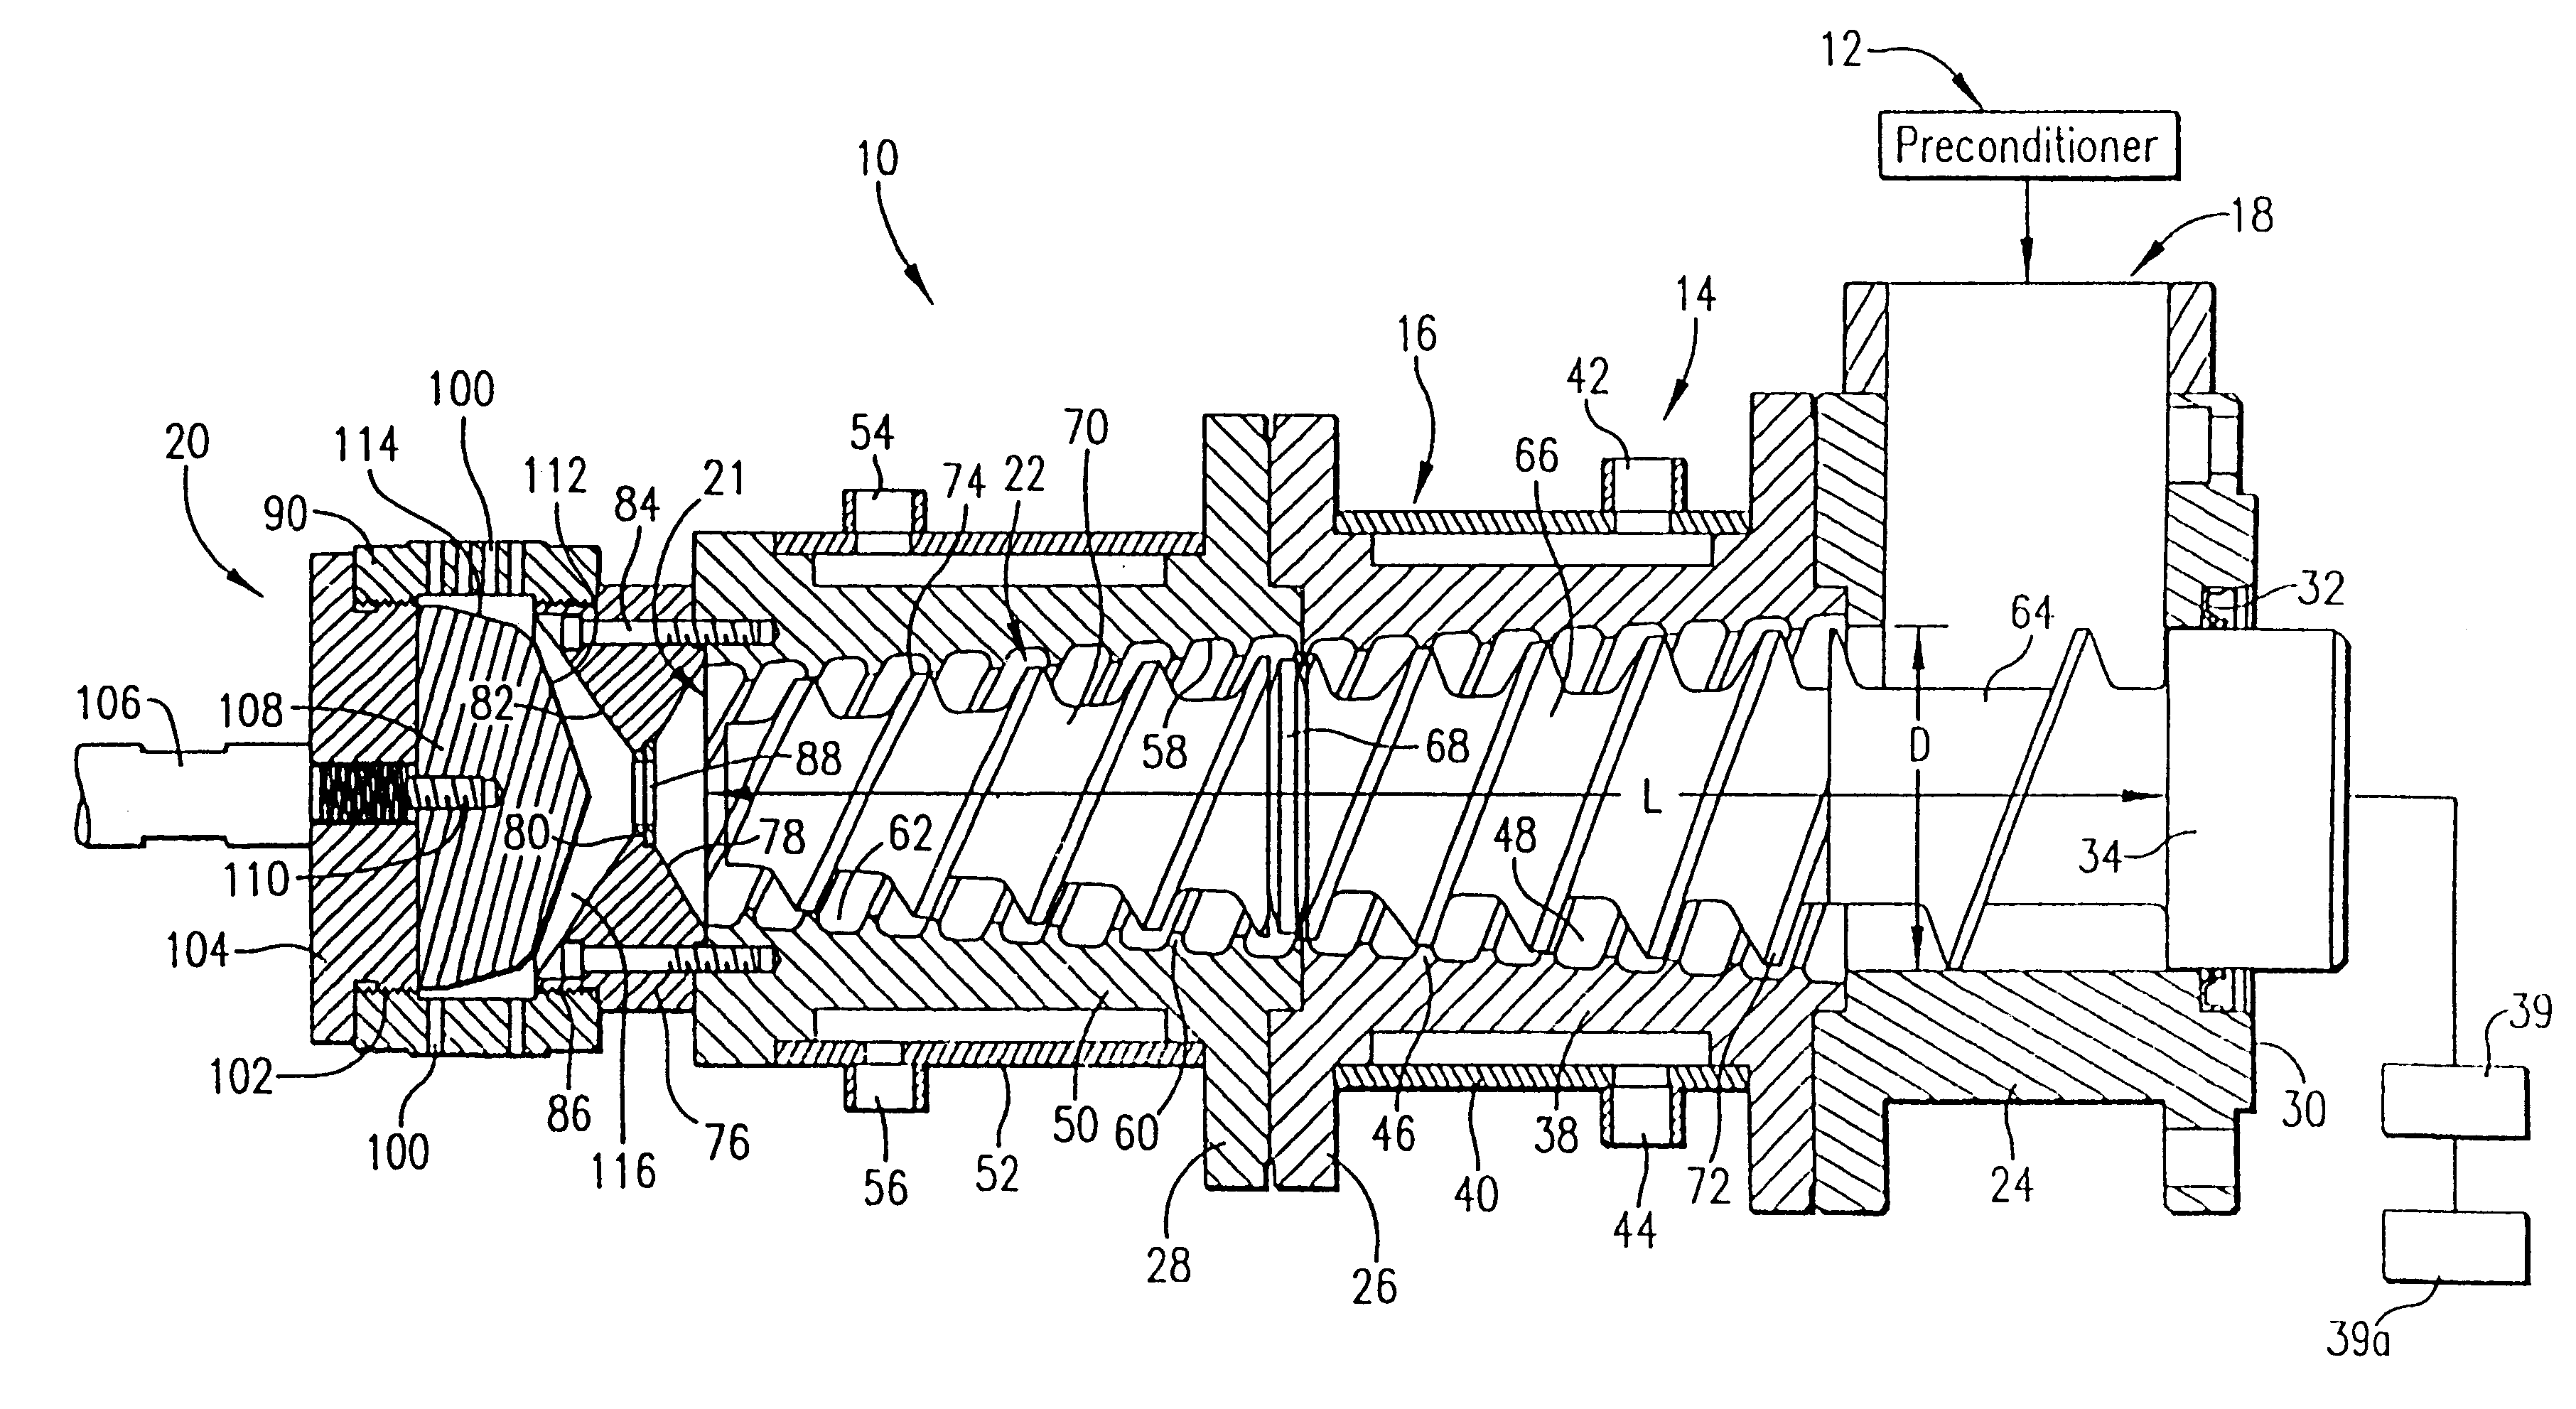 Short length tapered extrusion cooking apparatus having peripheral die